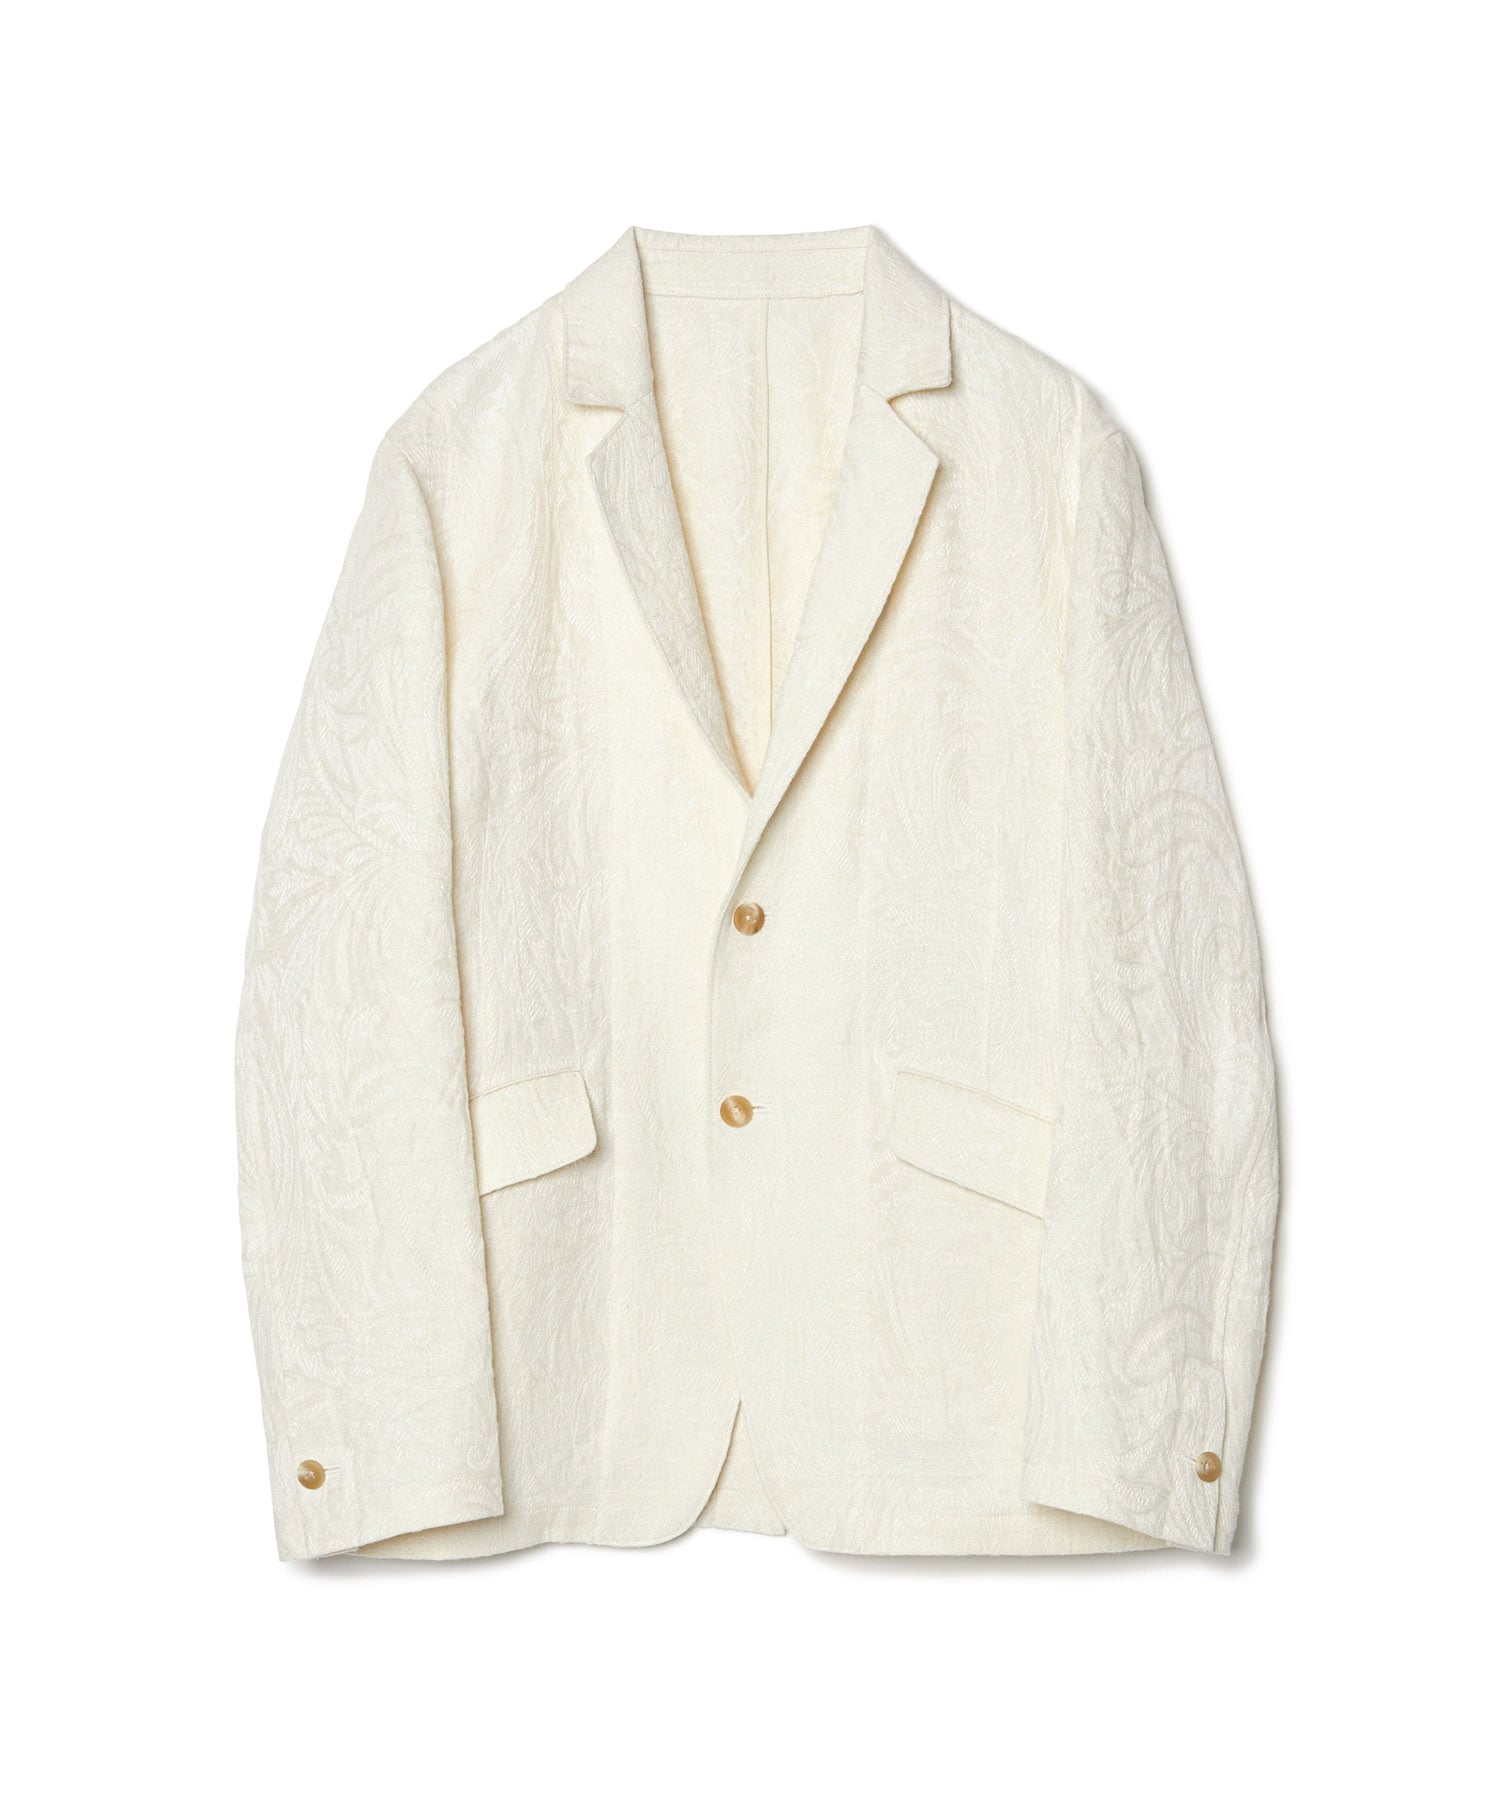 RELAXED CLASSIC JACKET(2 IVORY): IRENISA: MEN｜THE TOKYO ONLINE STORE